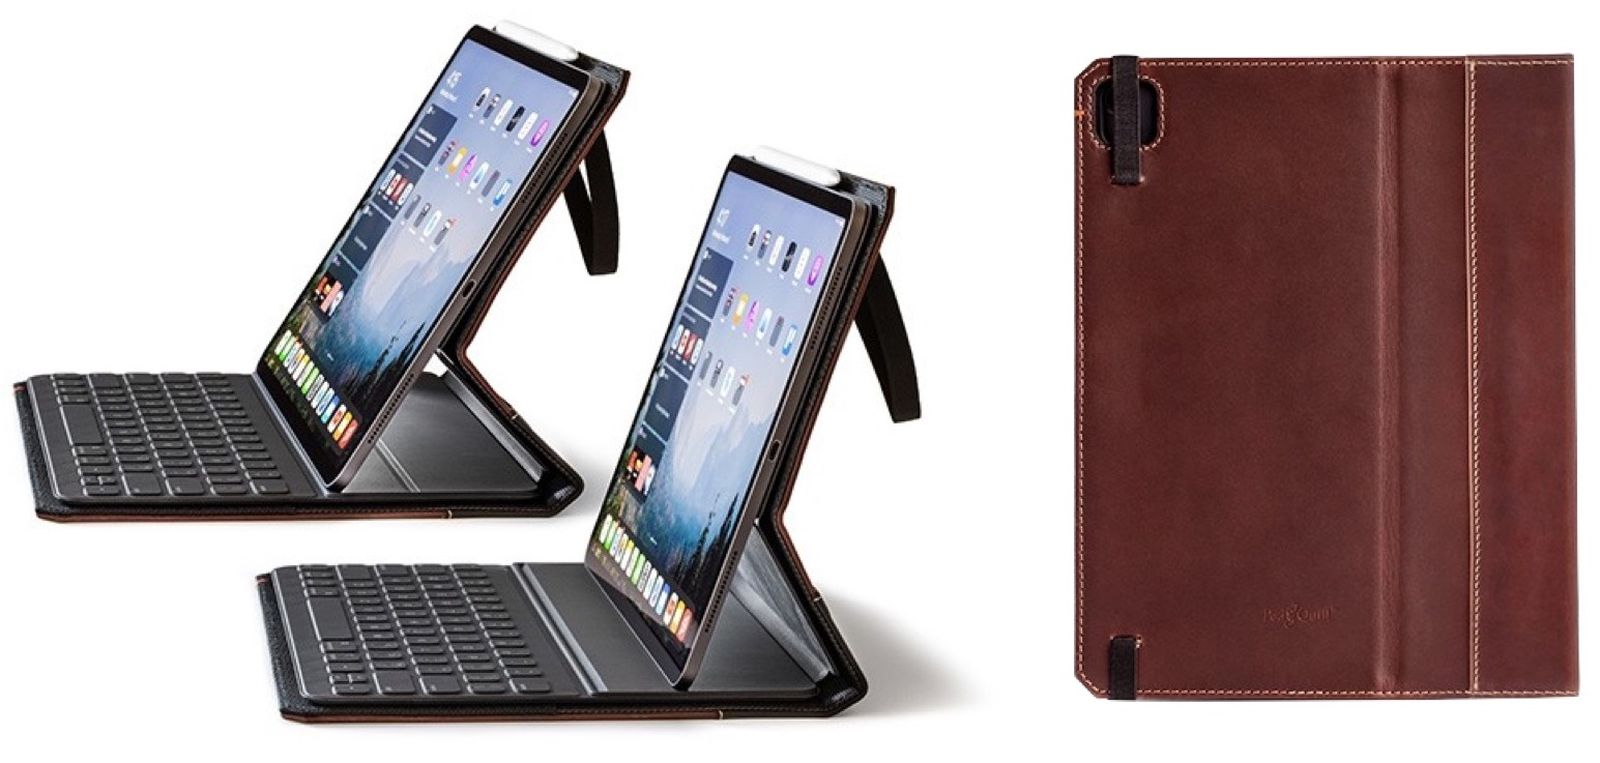 muhabir armoni sahne donanımı  Pad & Quill Launch Pre-Orders for 2020 iPad Pro Leather Keyboard Cases With  Cutout for Triple-Lens Camera - MacRumors